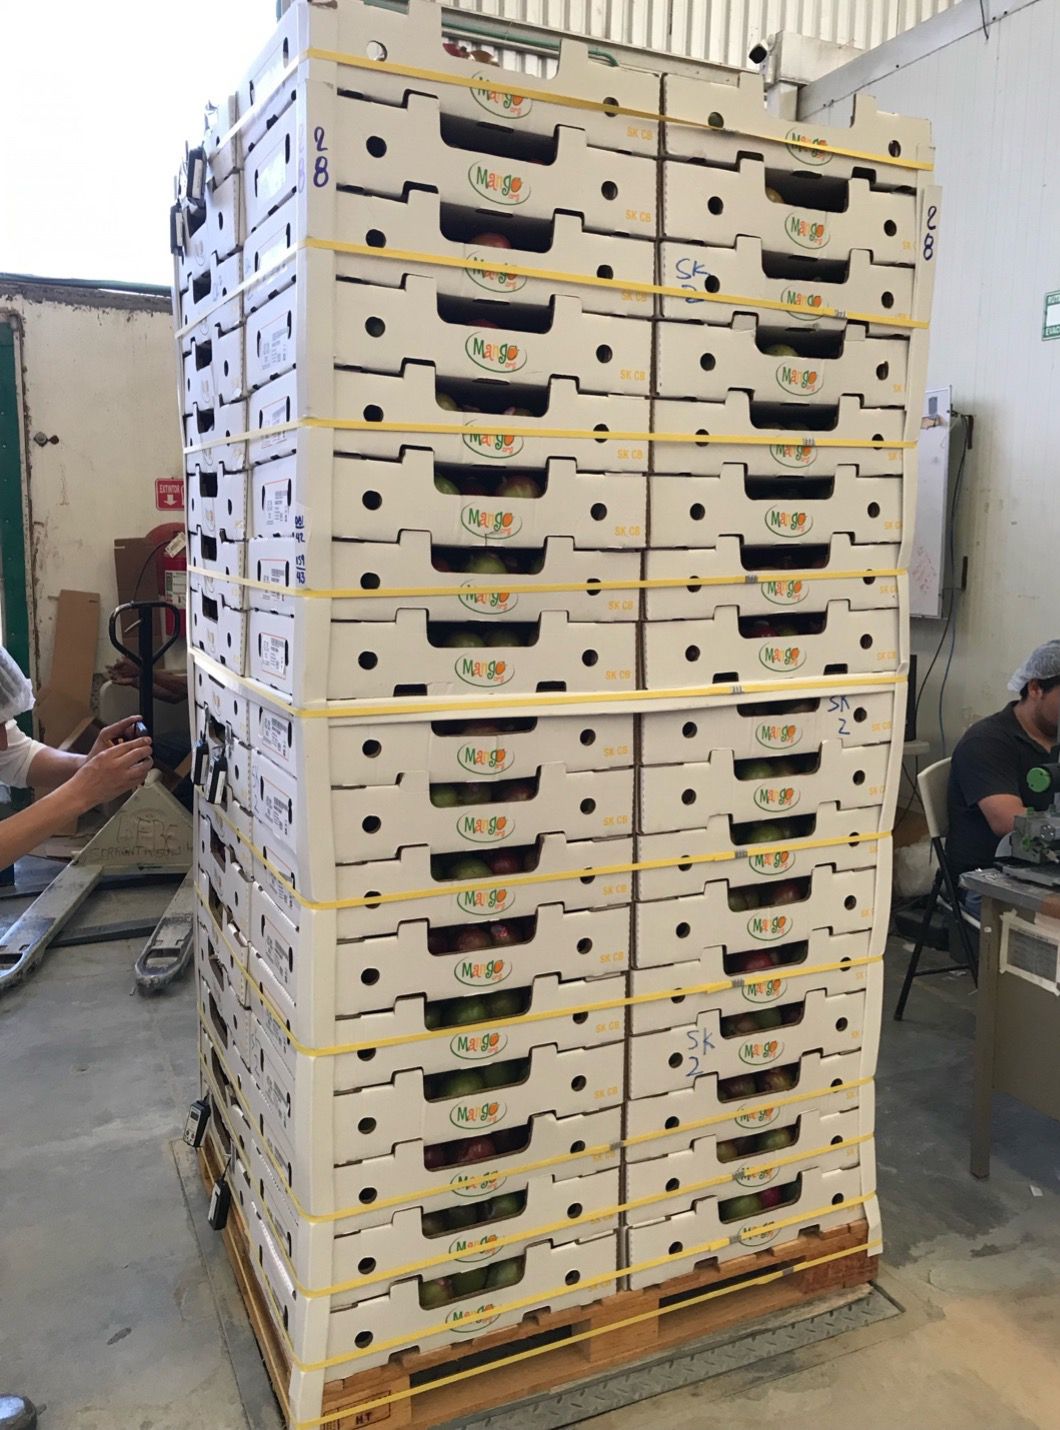 A pallet of properly designed 5-down mango cartons recommended by the National Mango Board (https://www.mango.org/professionals/industry/mango-packaging-palletization/). 